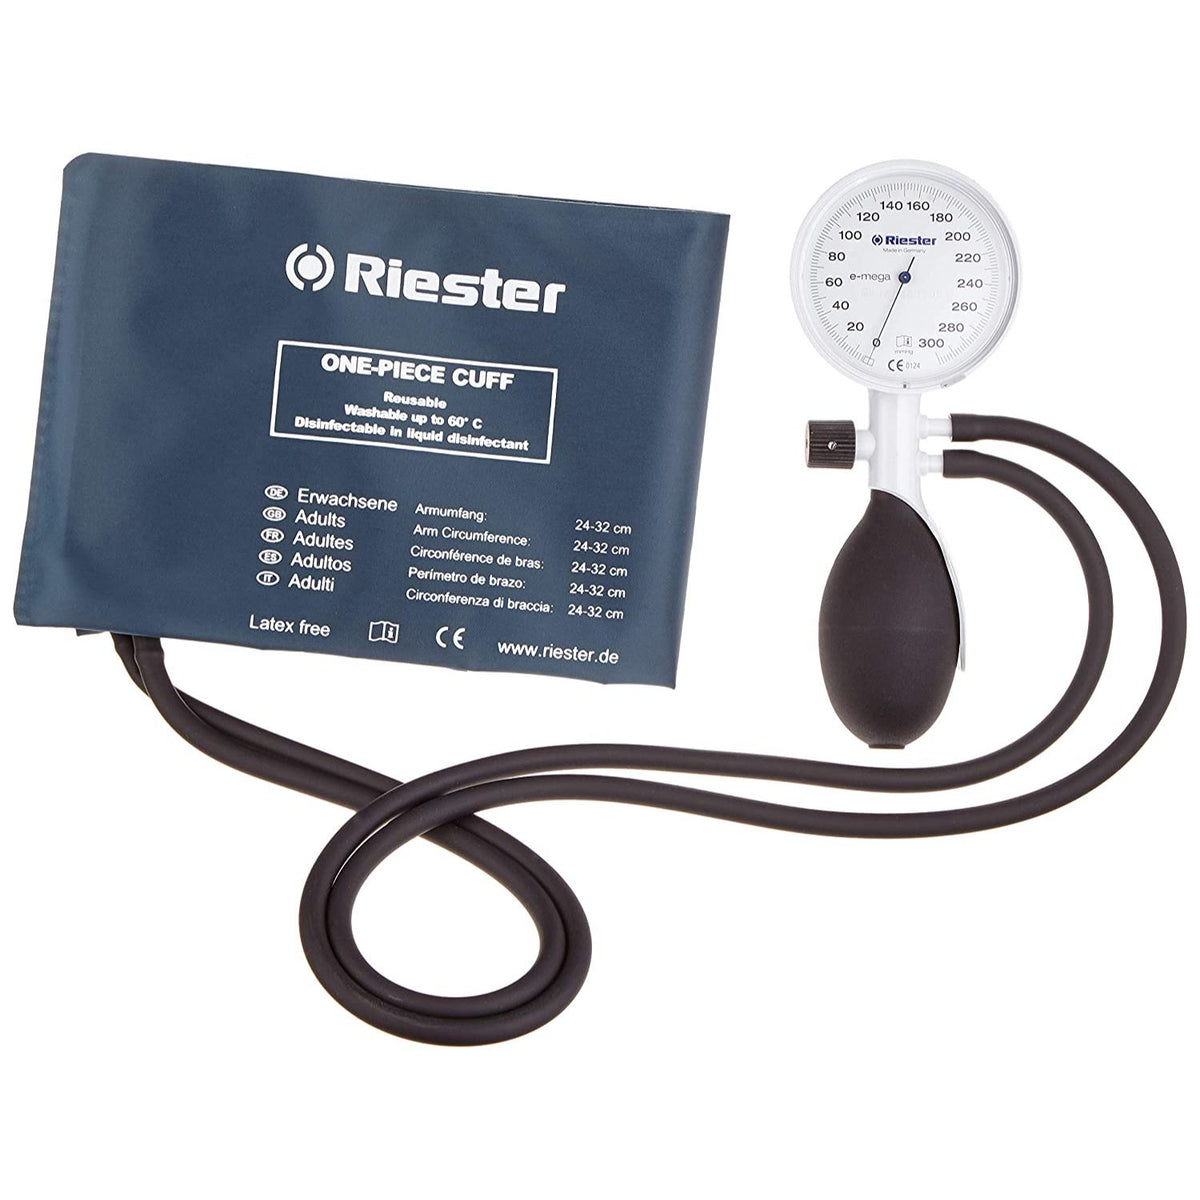 Riester E-Mega 2-Tube Sphygmomanometer Set With Disinfectable One-Piece Cuff